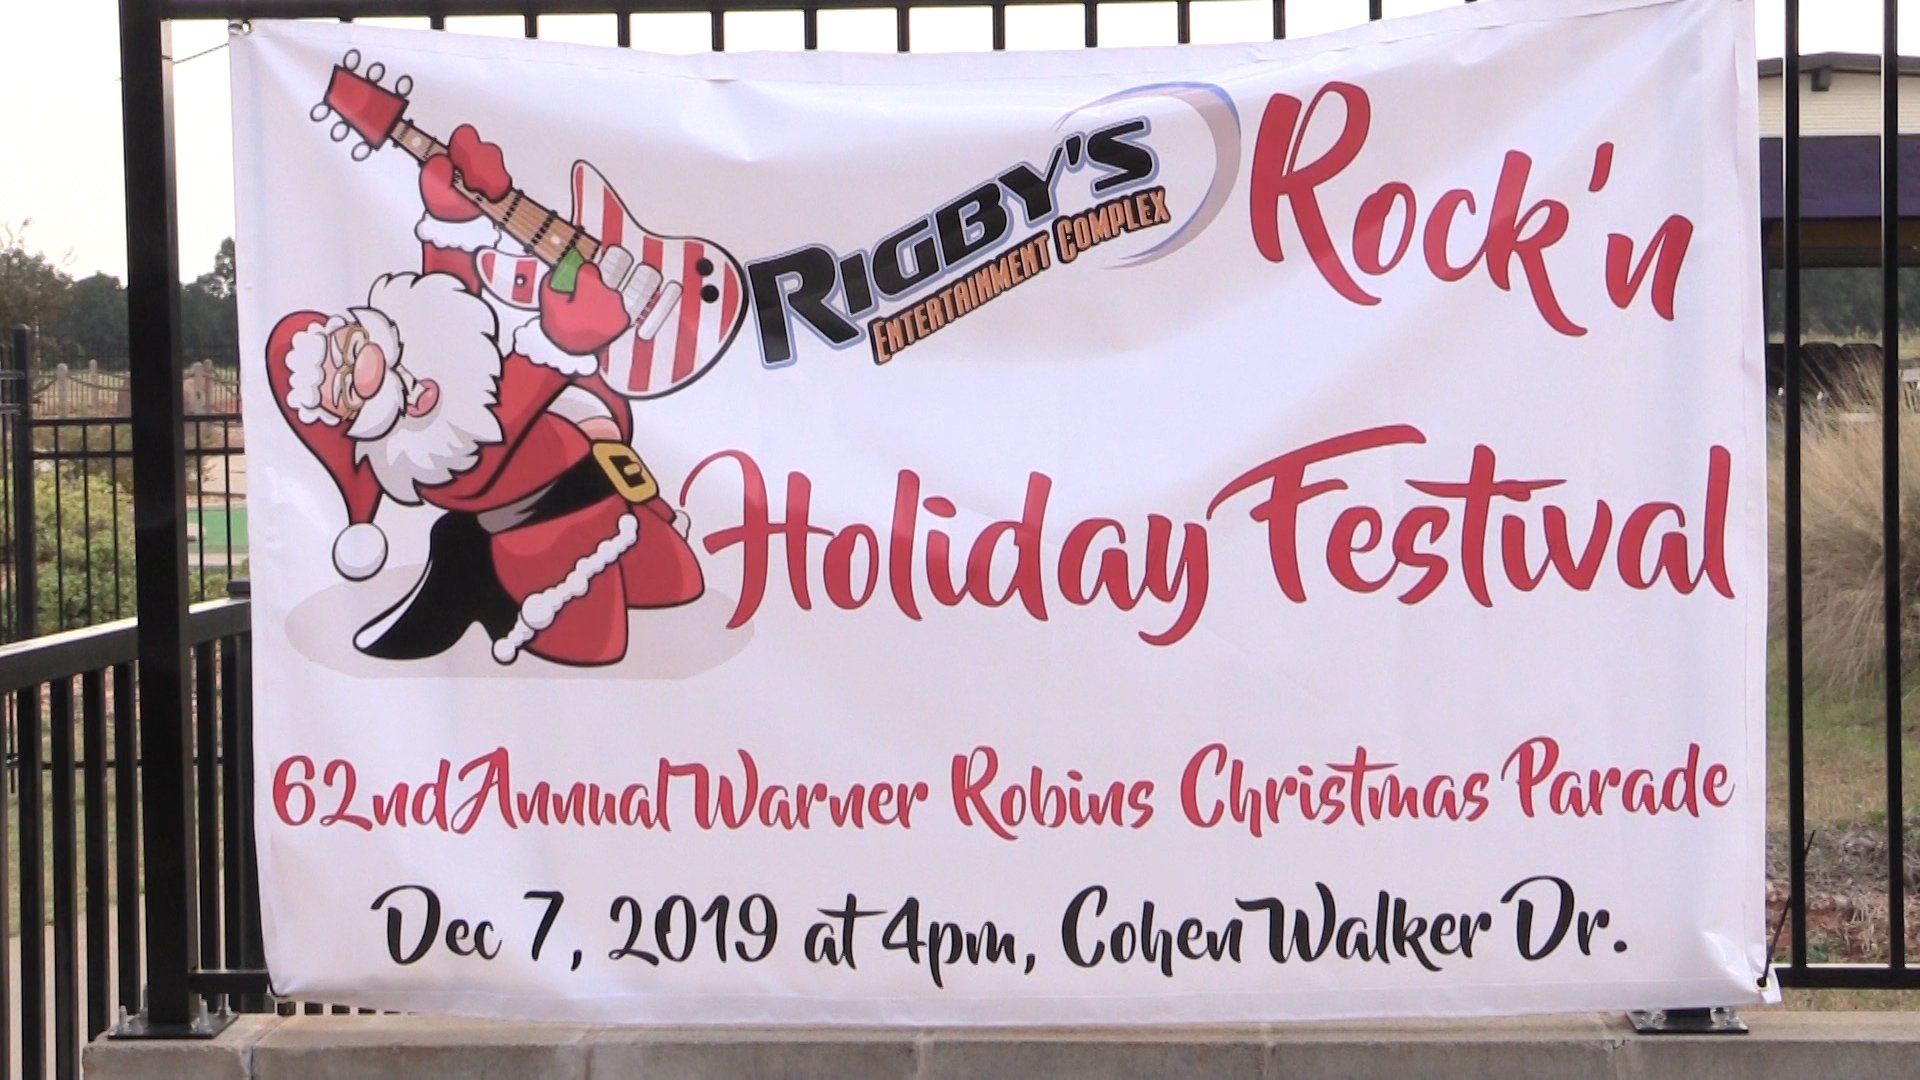 Rigby's Water World to kick off 62nd Annual Warner Robins Christmas